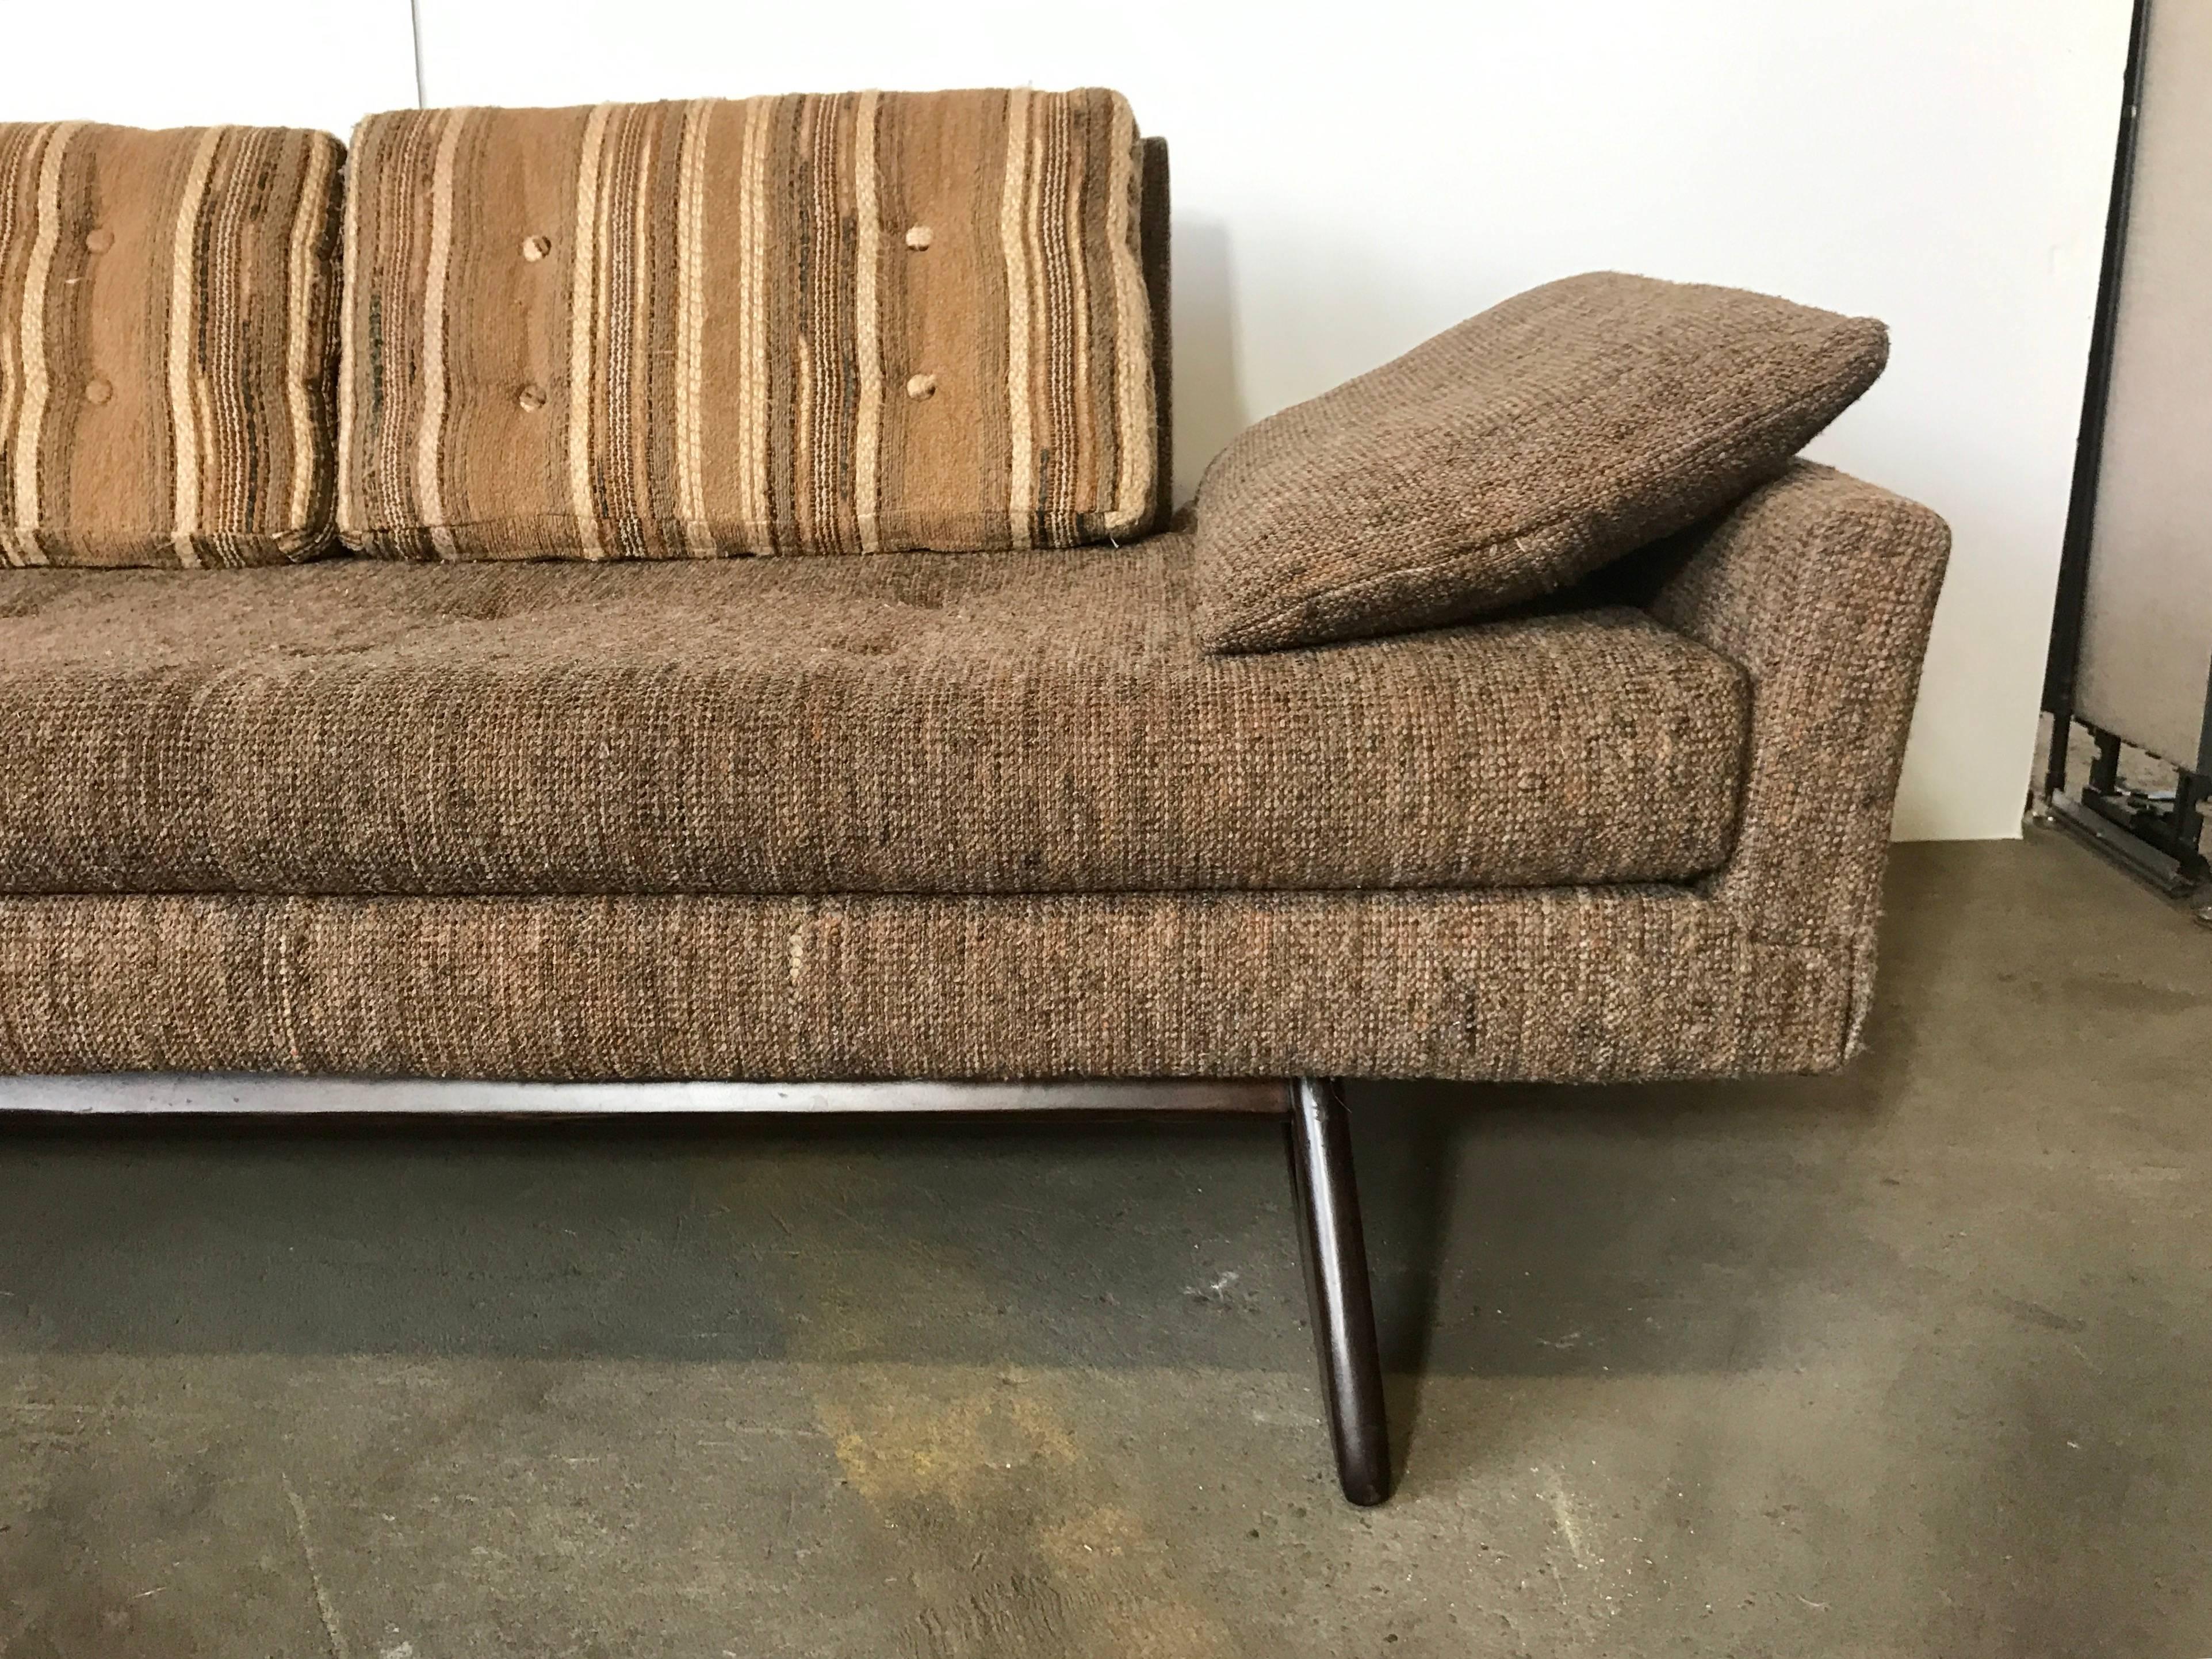 This large Adrian Pearsall sofa features unique sculpted walnut legs and a unique and stylish design, retains its original Mid-Century Modern fabric, nice usable condition. Priced accordingly, perfect reupholster candidate.